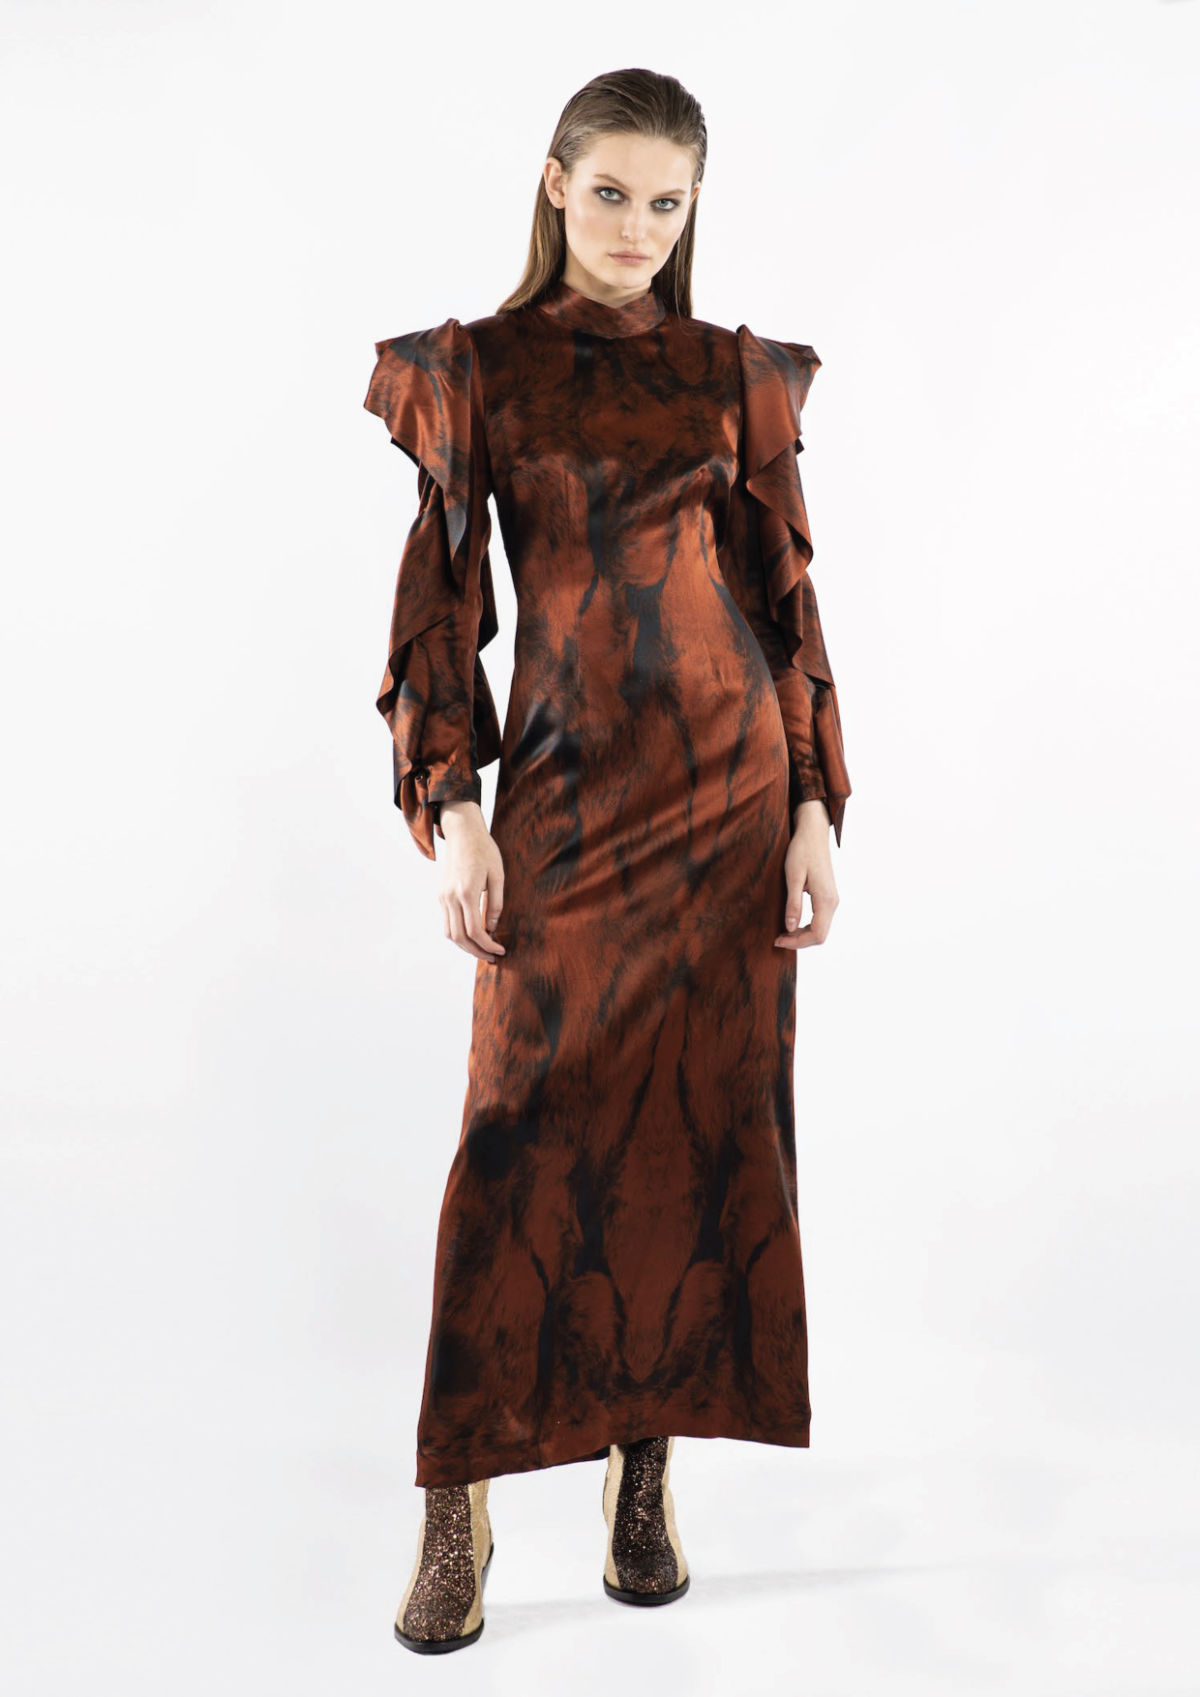 Collini Presents Its Fall Winter 21/22 Collection: Women's Library